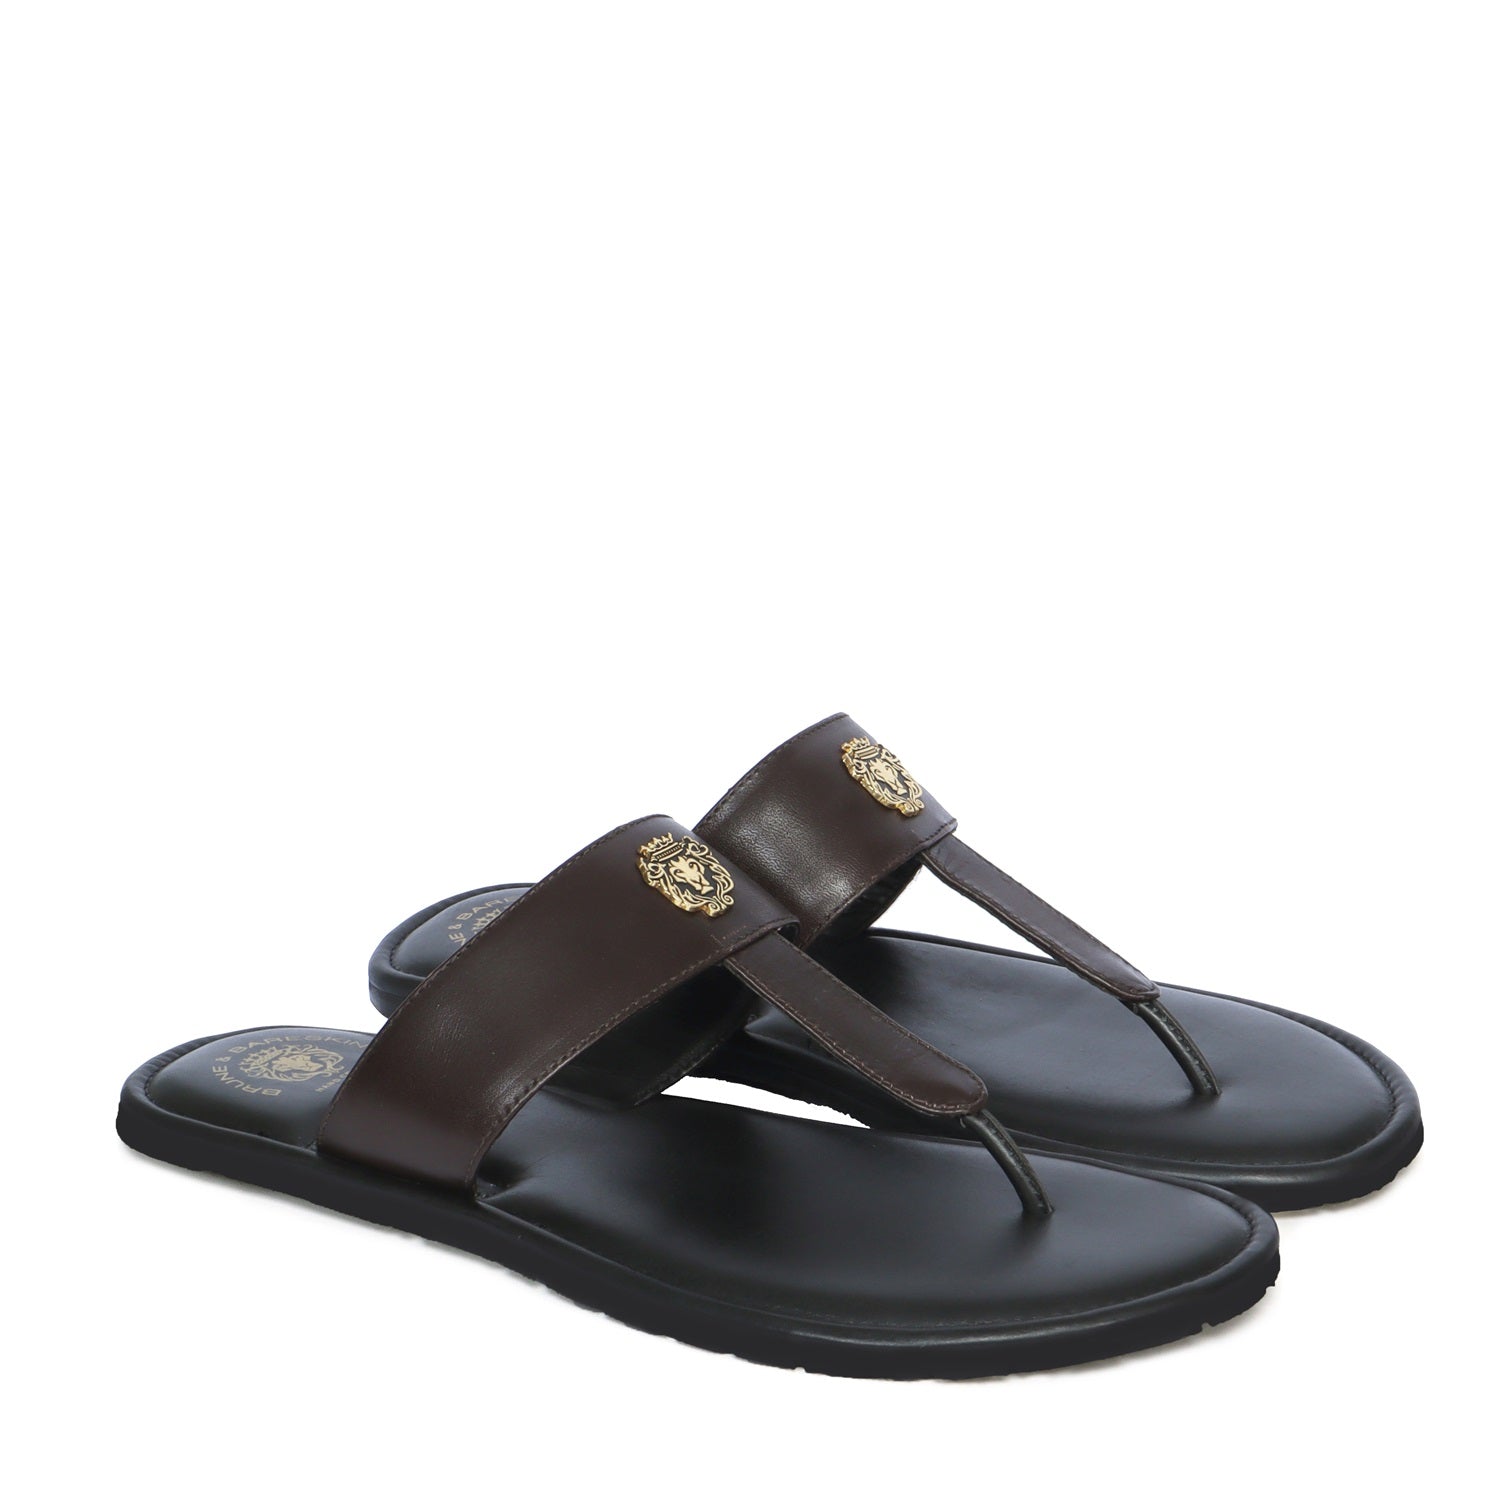 Beach Sandals, Flip Flop Unisex For Casual Wear Anti-Slip Thick Bottom  Slipper at Rs 320/pair | Clifford Nongrum Road | Shillong | ID: 26104123030